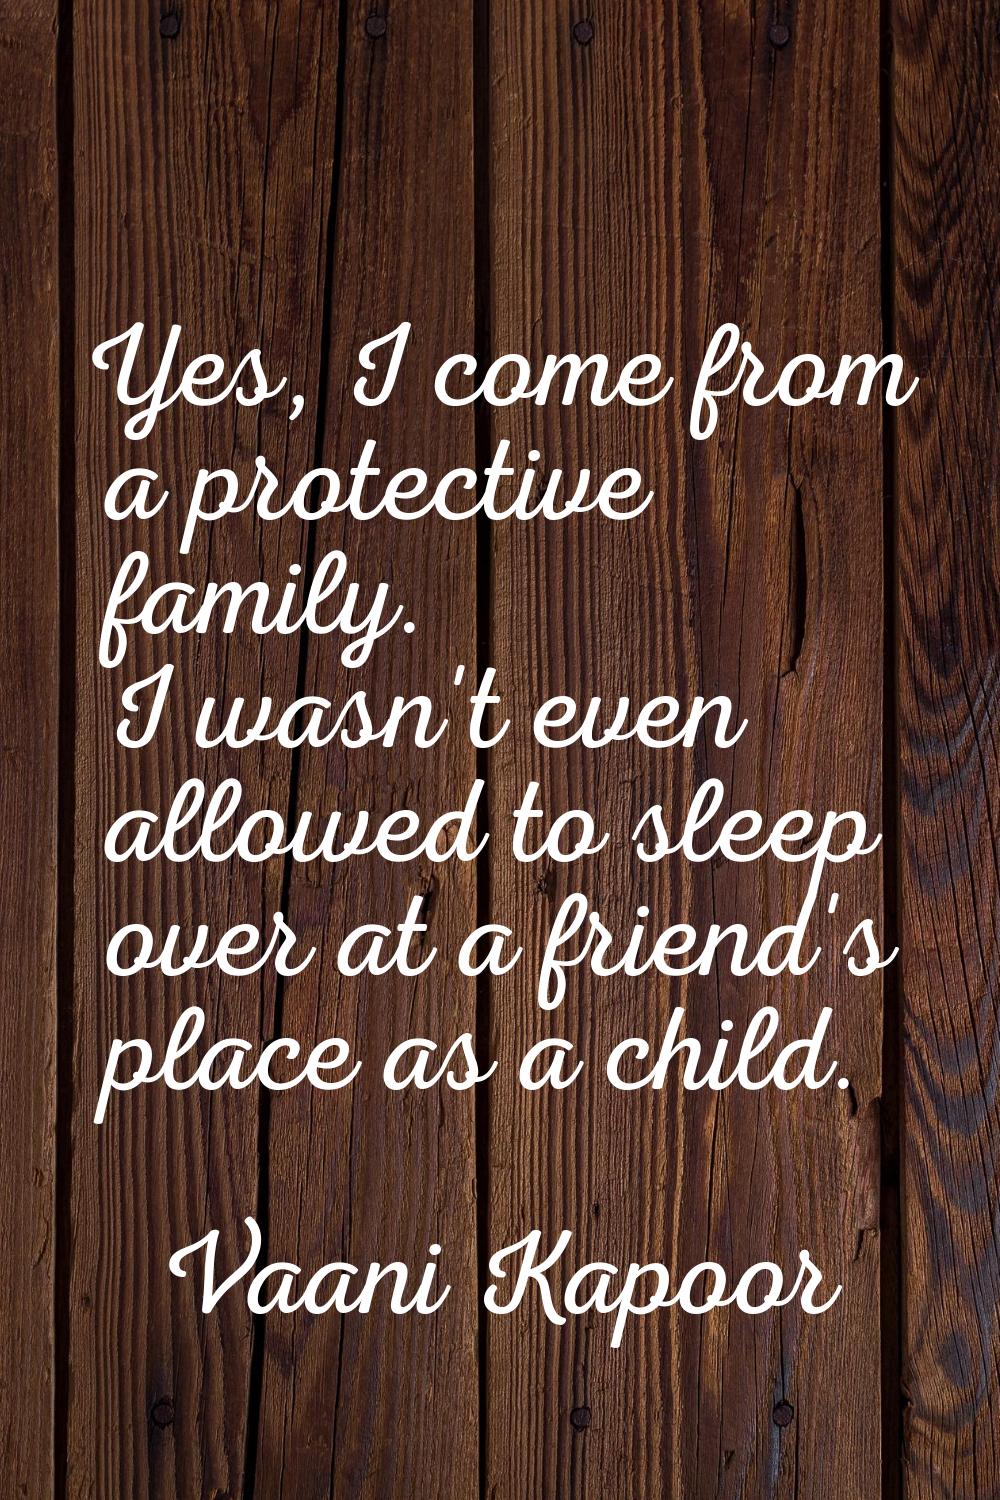 Yes, I come from a protective family. I wasn't even allowed to sleep over at a friend's place as a 